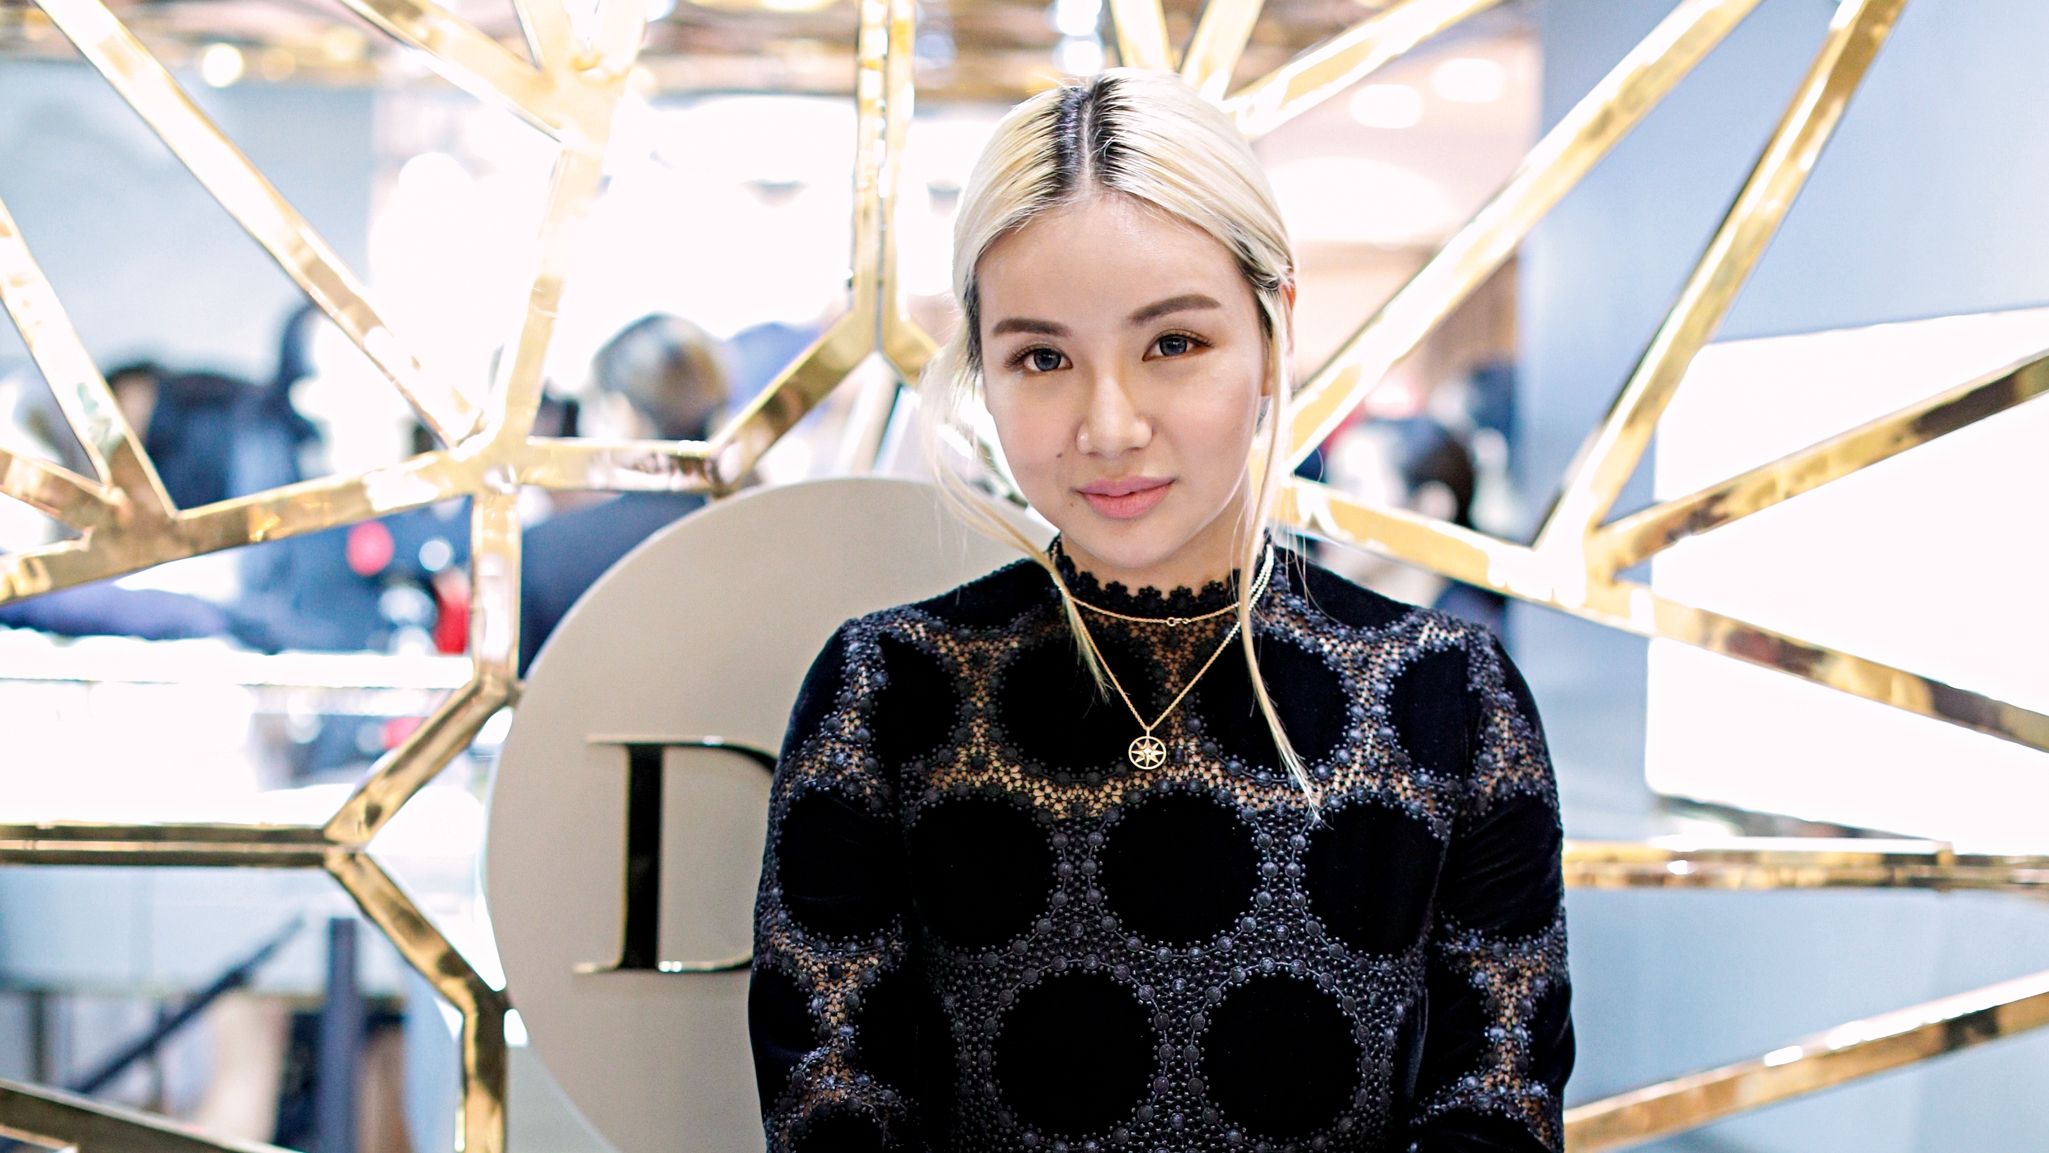 Event Photo Gallery: Dior’s First Rose Des Vents Collection Pop-Up